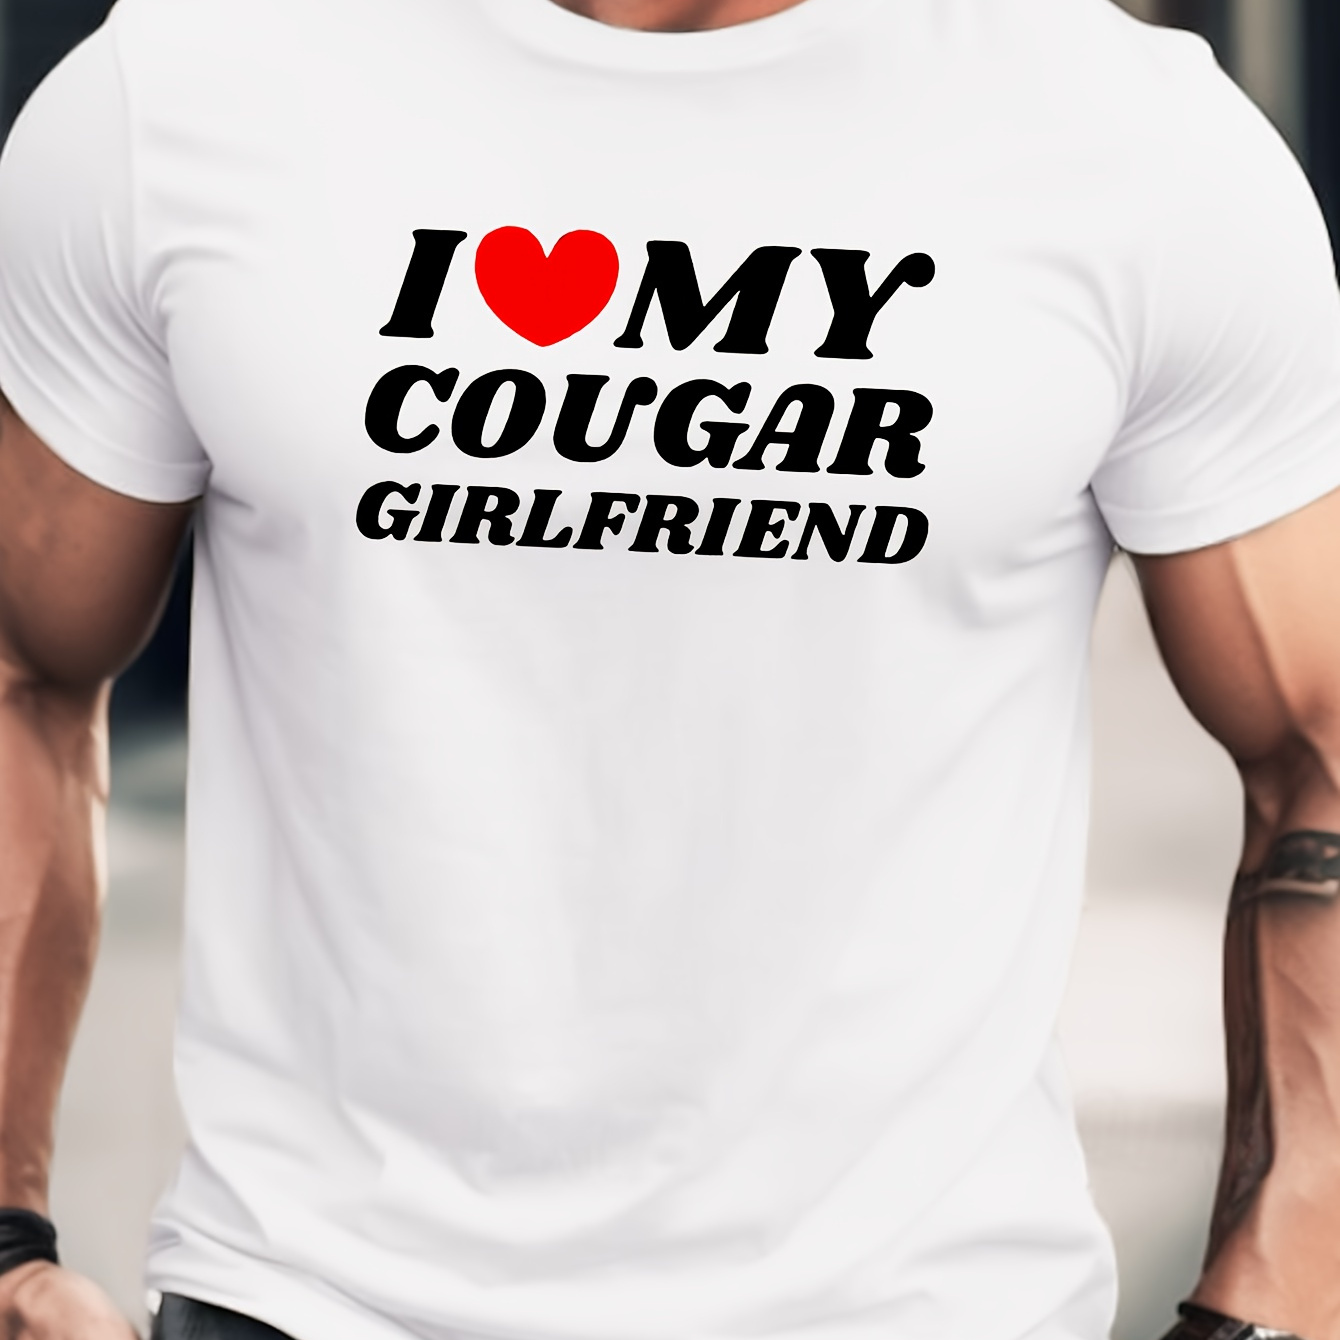 

I Love My Girlfriend Print T-shirt, Stylish & Breathable Street , Simple Lightweight Comfy Top, Casual Crew Neck Short Sleeve T-shirt For Summer